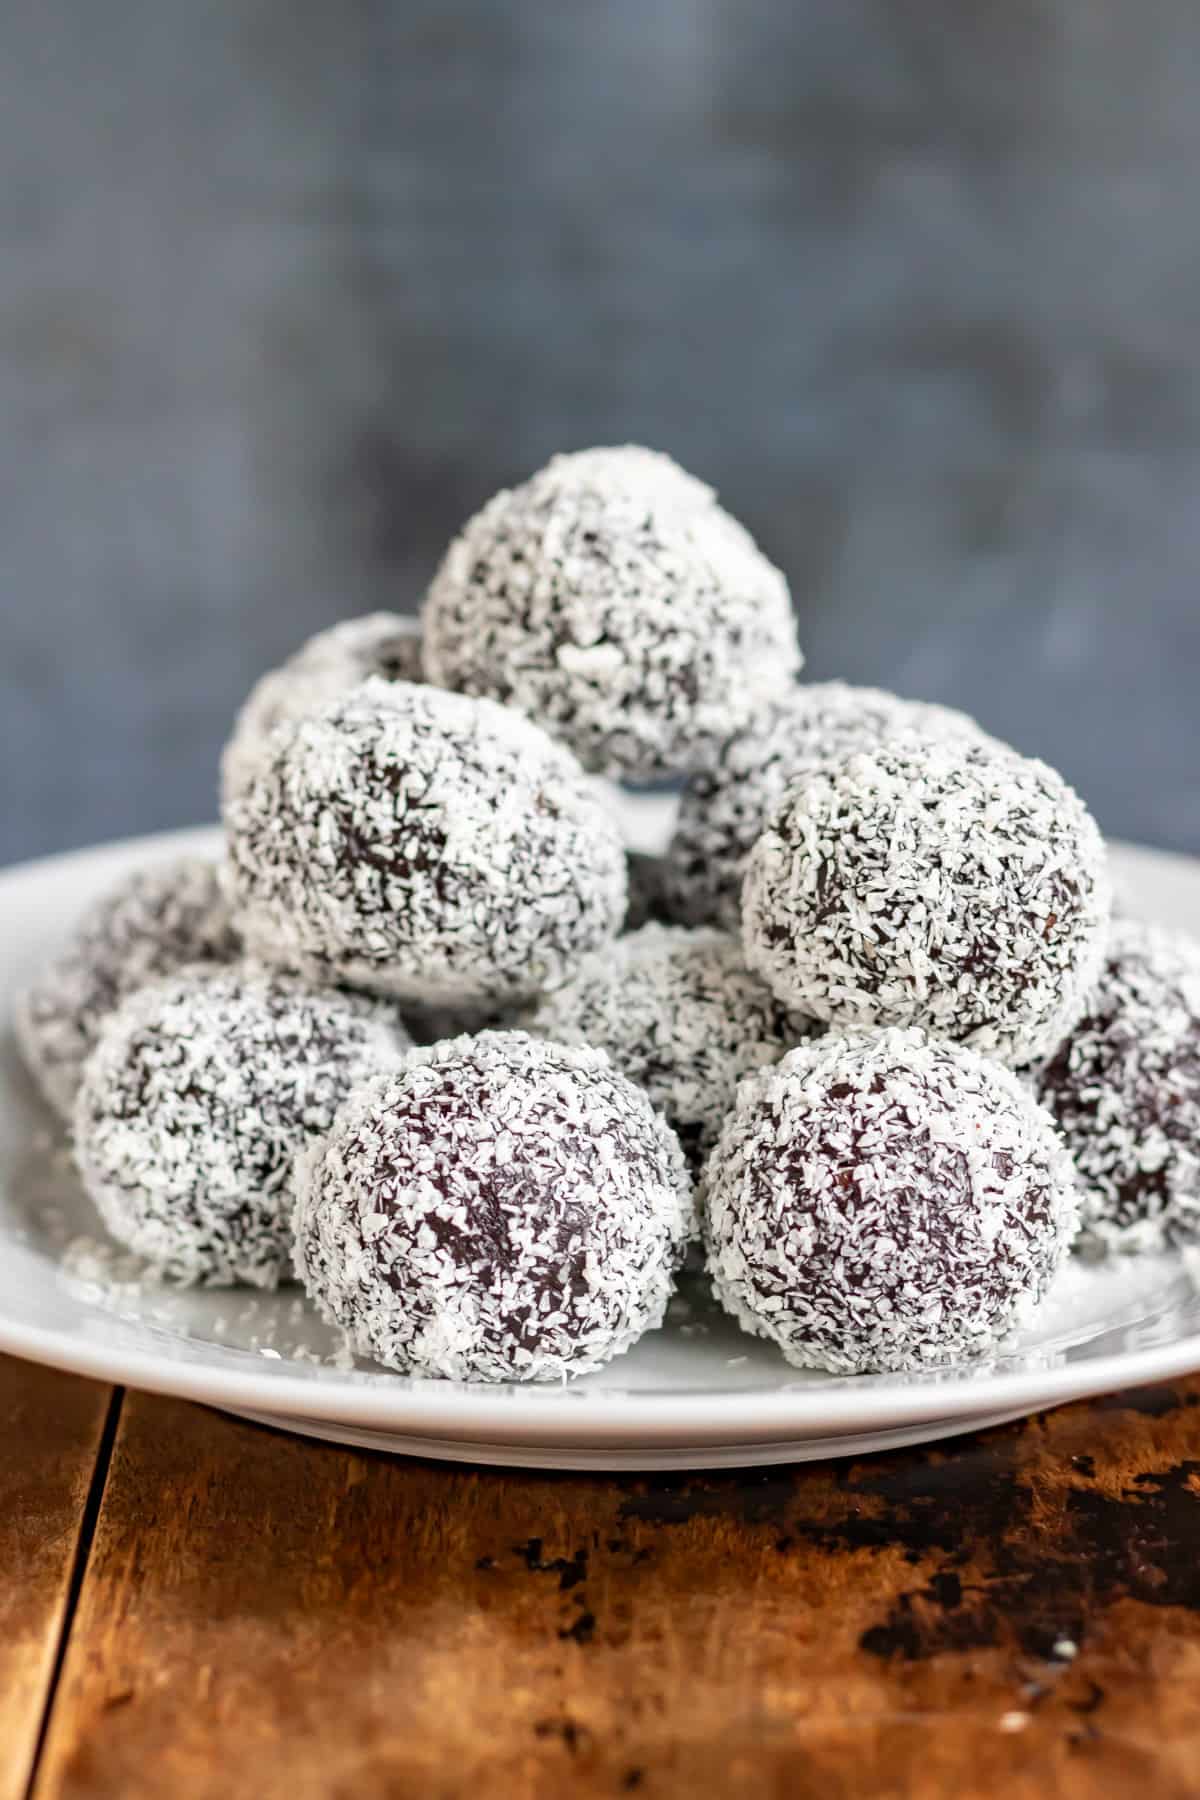 Side view of romkugler Danish rum balls in coconut, piled onto a plate.